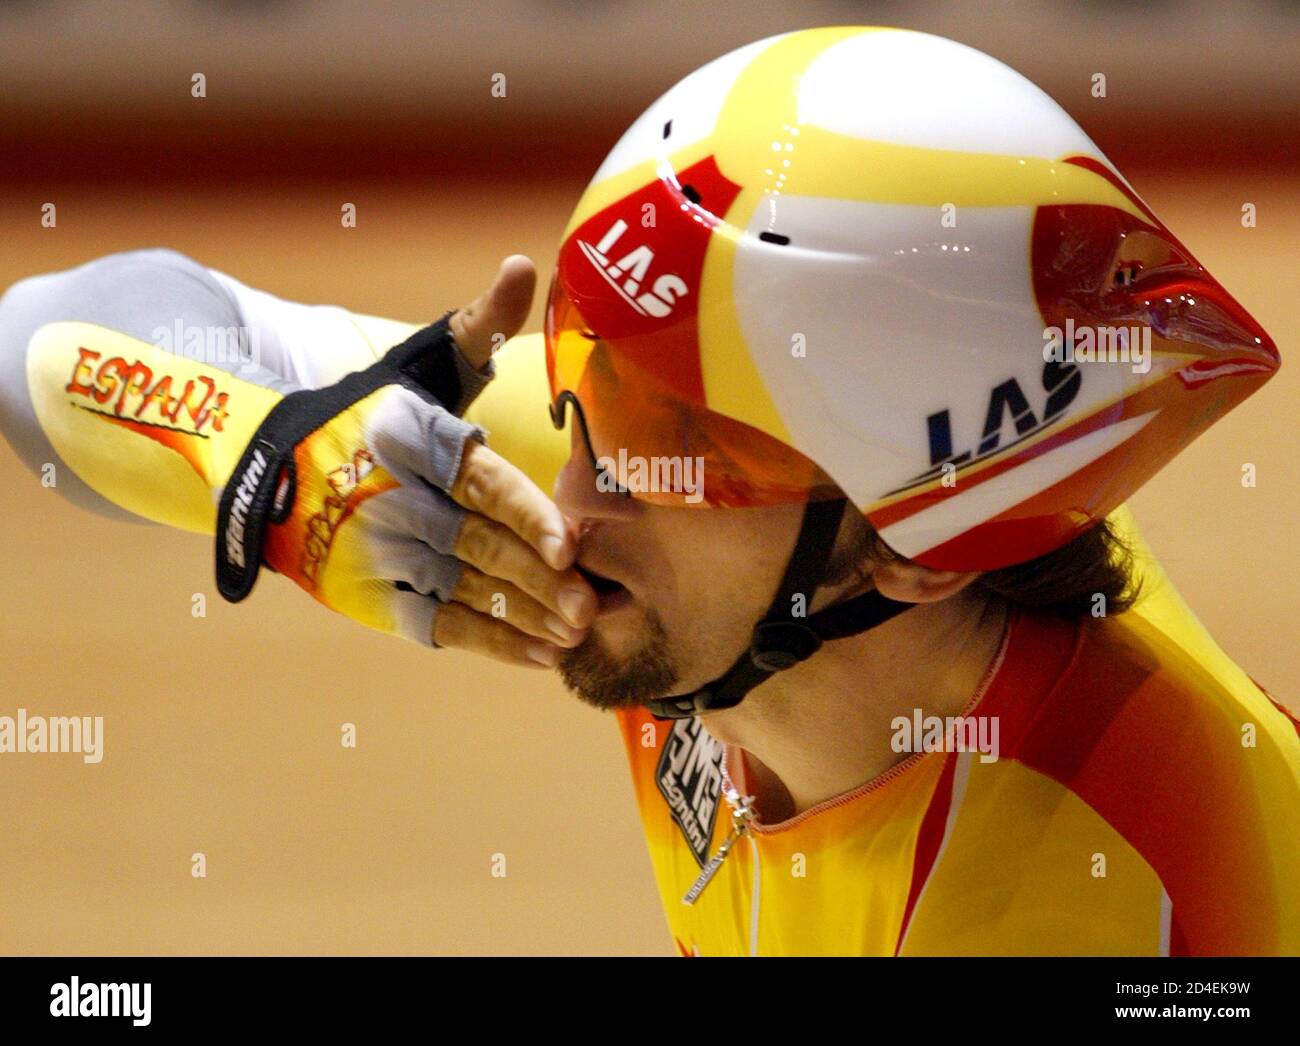 SERGI ESCOBAR ROURE FROM SPAIN CELEBRATES WINNING THE MEN'S INDIVIDUAL  PURSUIT FINAL AT THE WORLD CHAMPIONSHIPS IN MELBOURNE. Sergi Escobar Roure  from Spain celebrates by blowing kisses to the crowd after winning